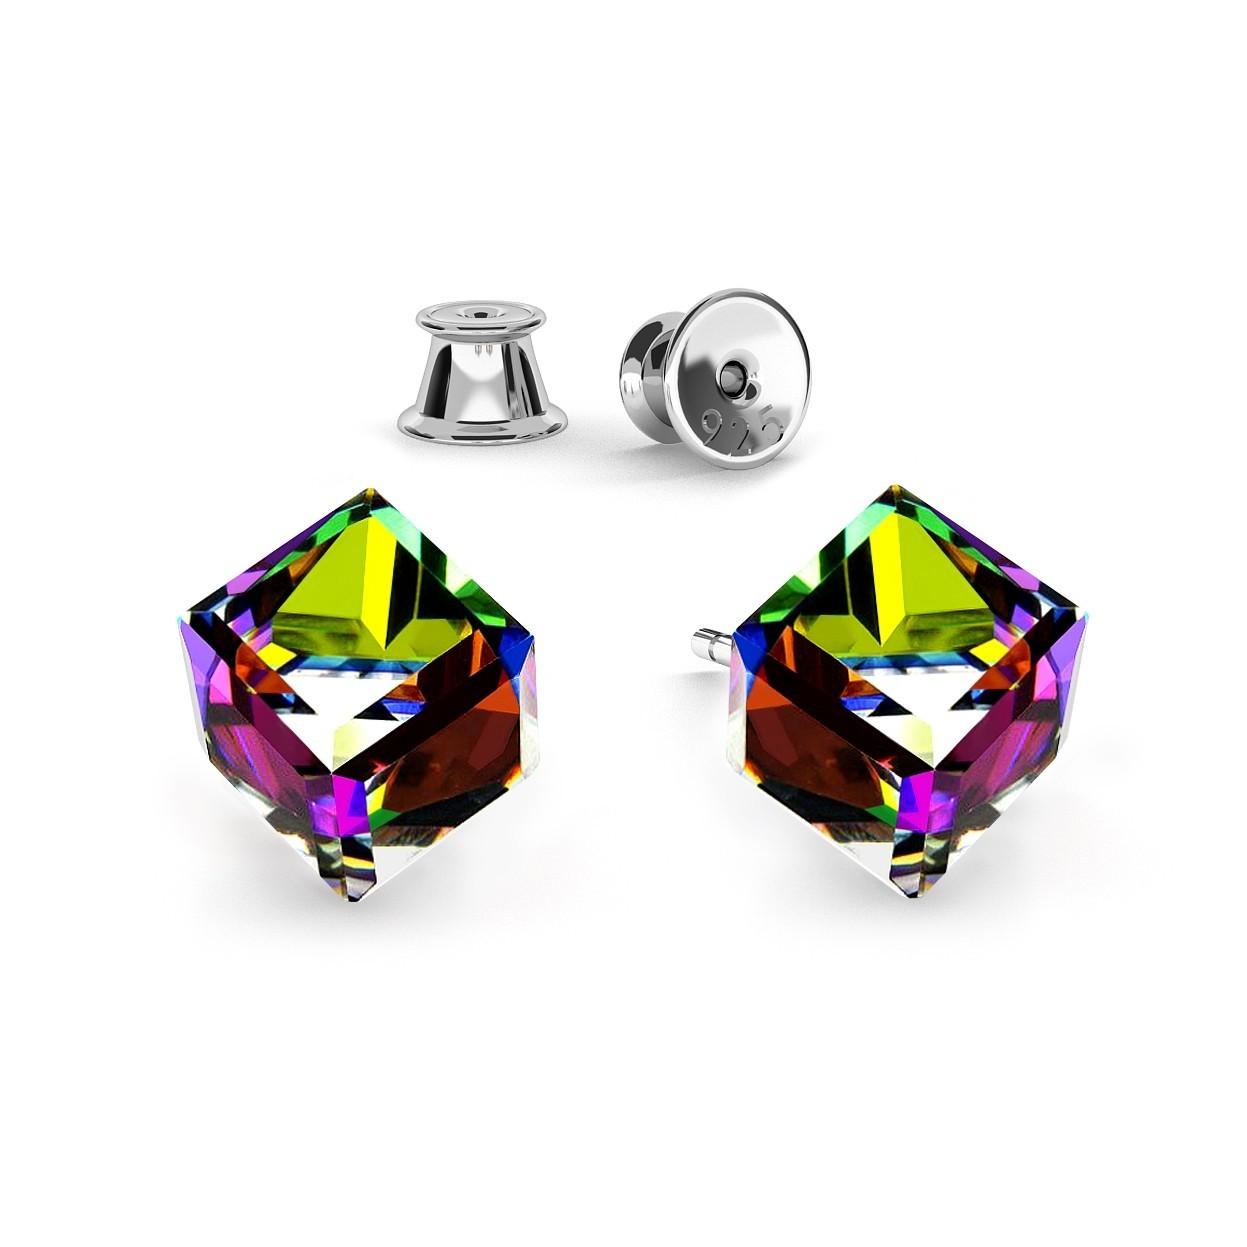 CUBE EARRINGS, SWAROVSKI 4841 MM 6, RHODIUM OR GOLD PLATED